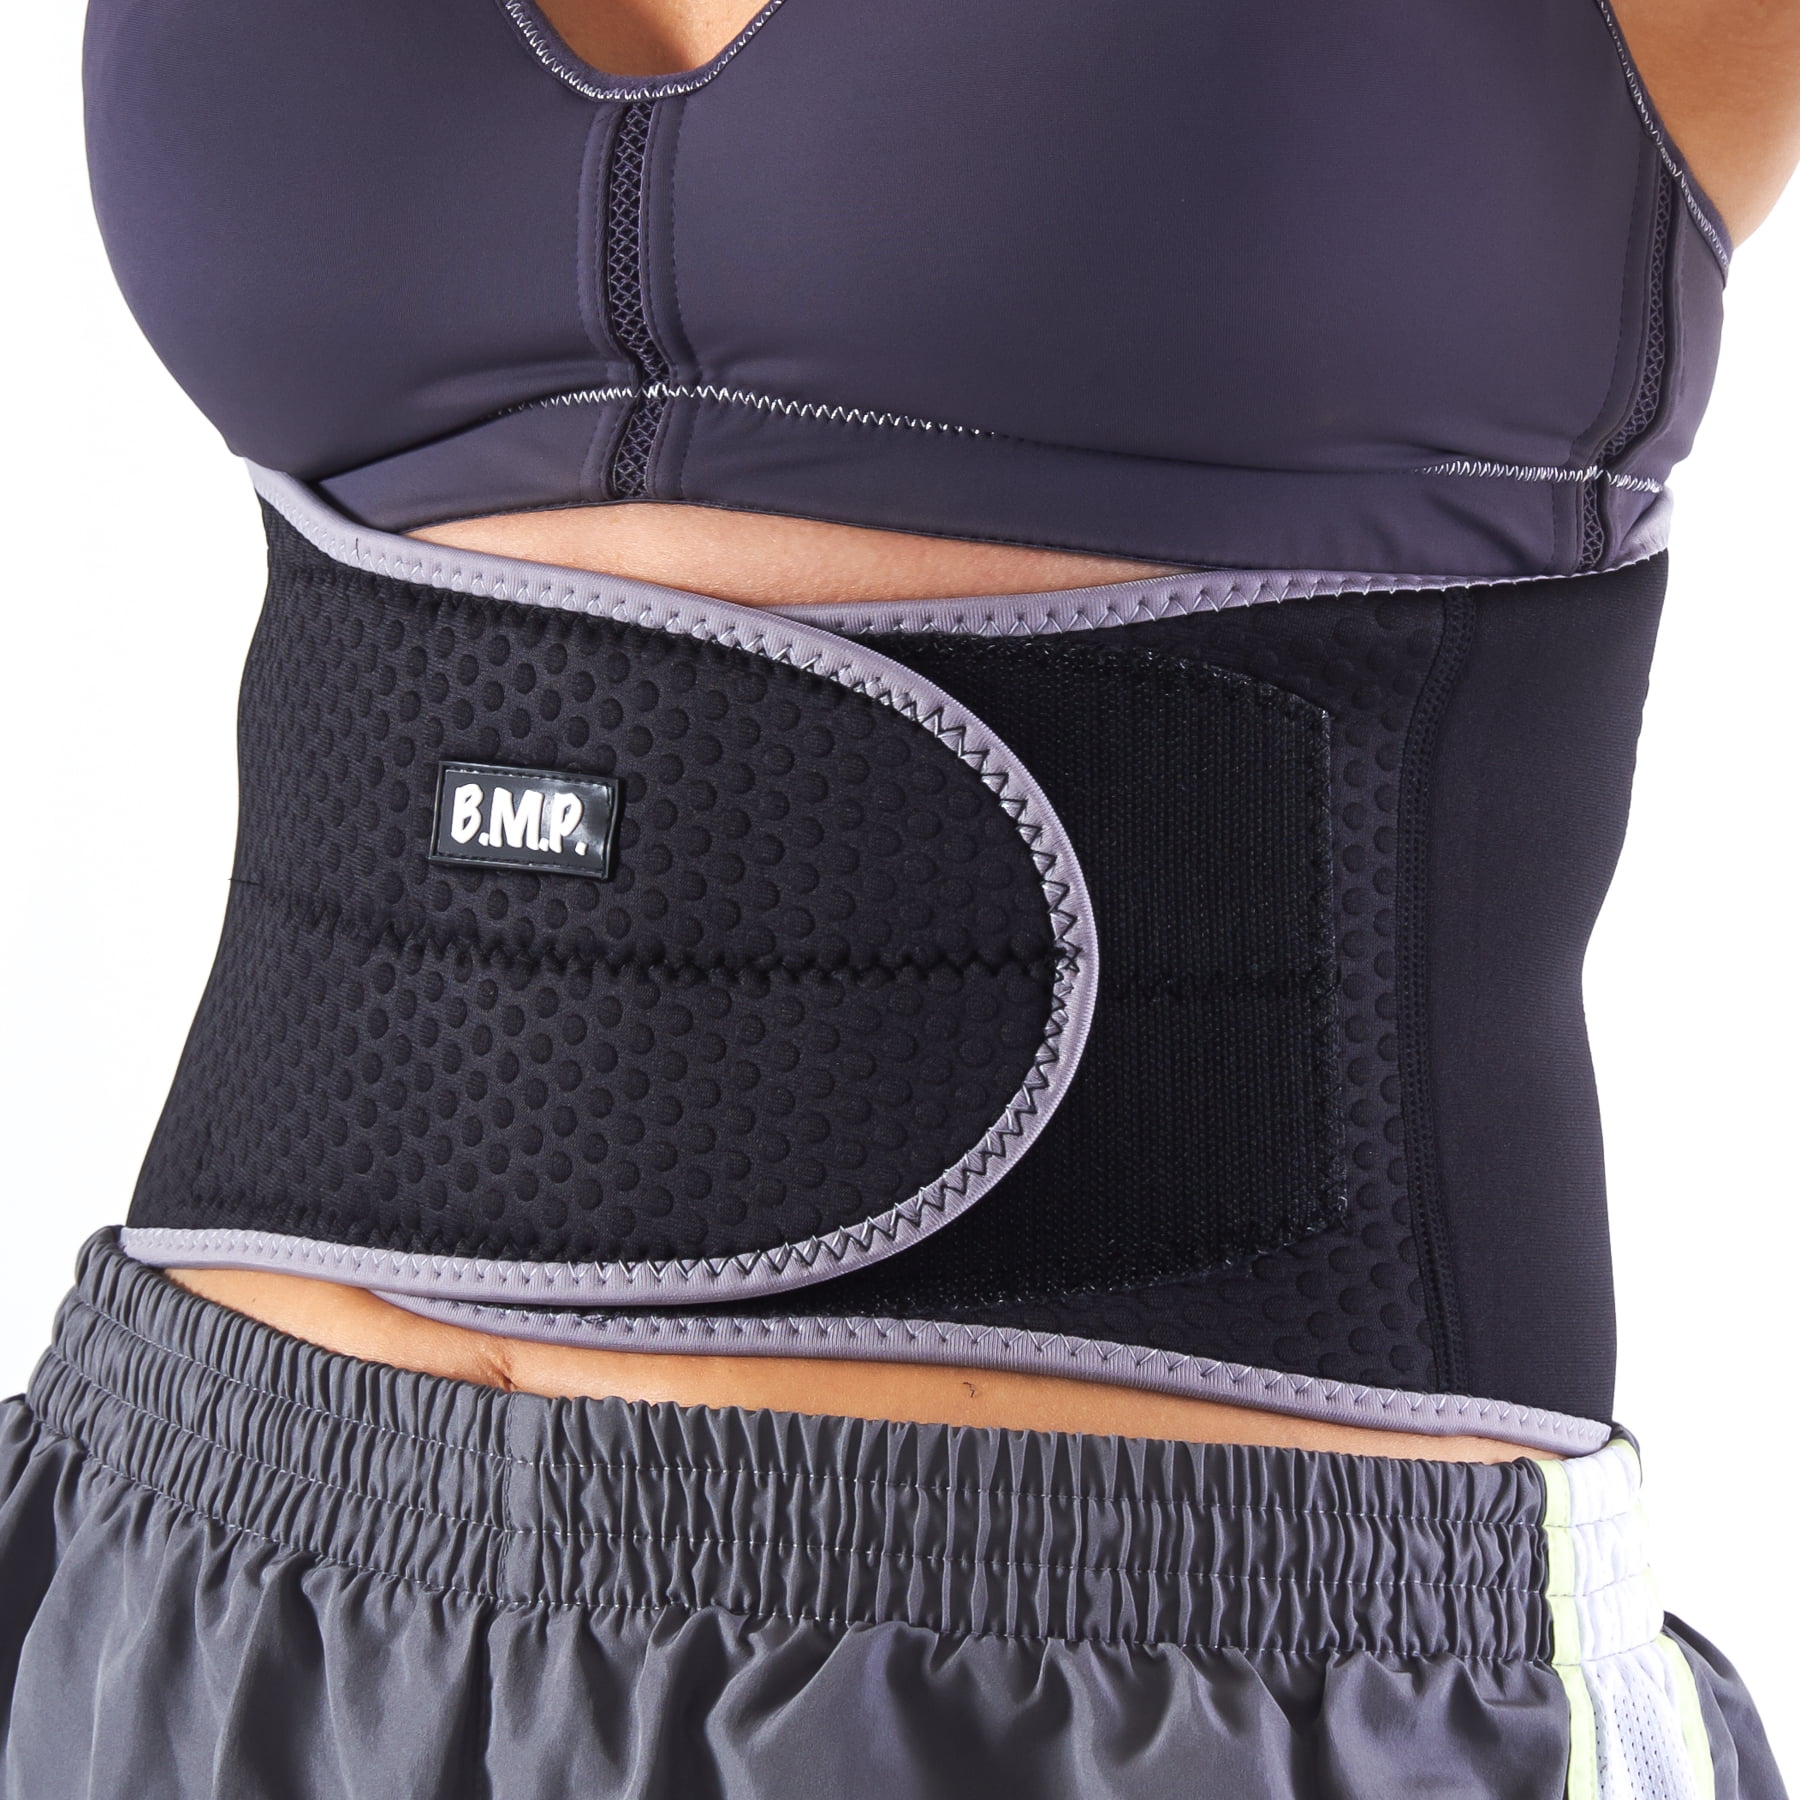 FIRBEE Self-Heating Tourmaline and Magnetic Therapy Belt for Pain Relief and Lumbar Support Lower Back Brace and Waist Trimmer Bonus Drawstring Backpack 